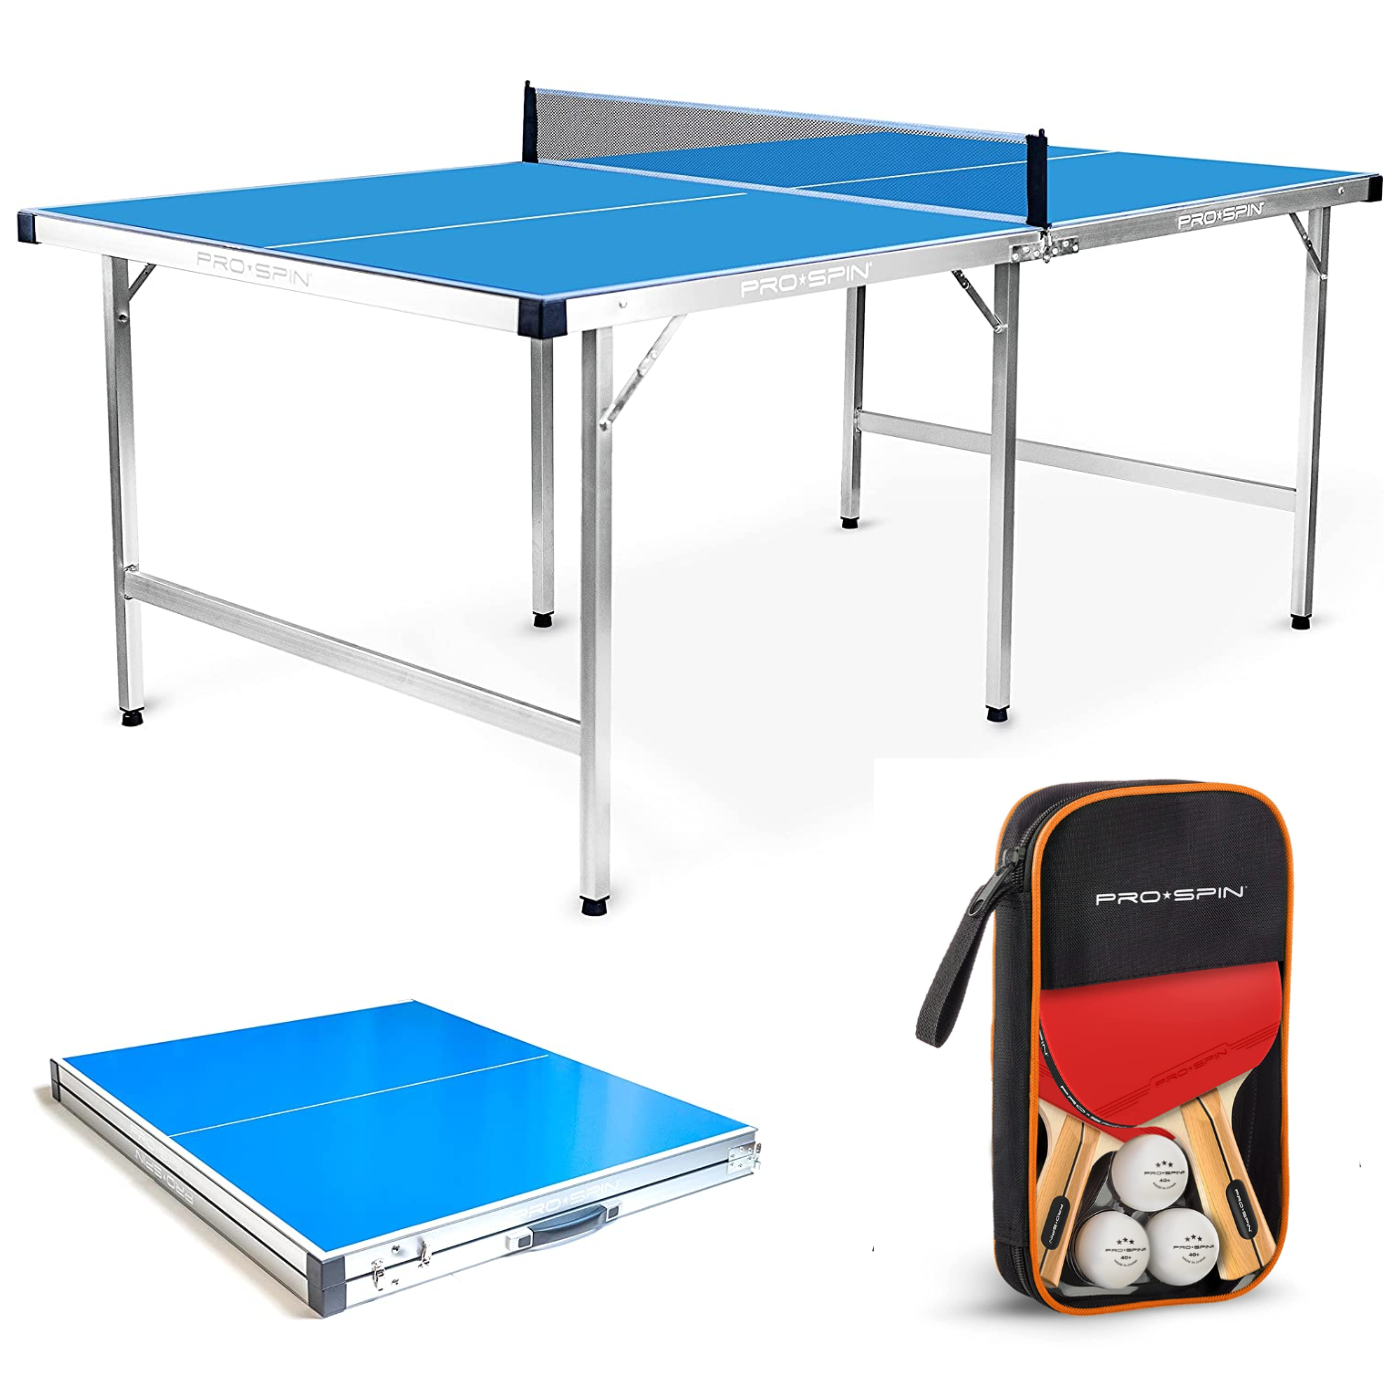 Trampoline Pong - Table Tennis Set - Thin Air – The Red Balloon